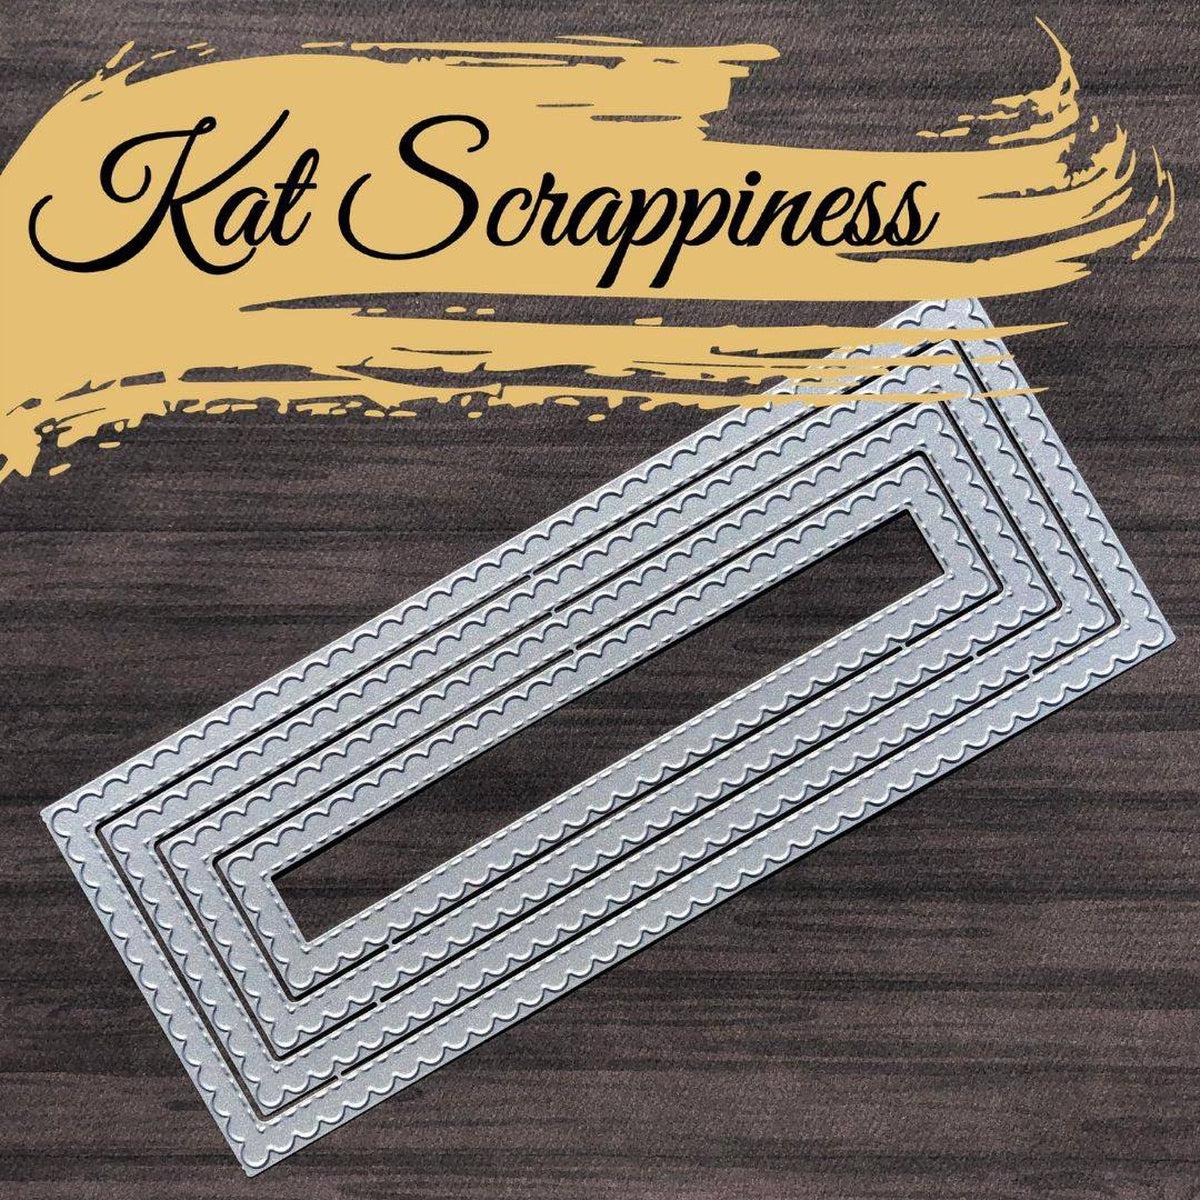 Stitched Scalloped Nesting Slimline Dies by Kat Scrappiness - Kat Scrappiness